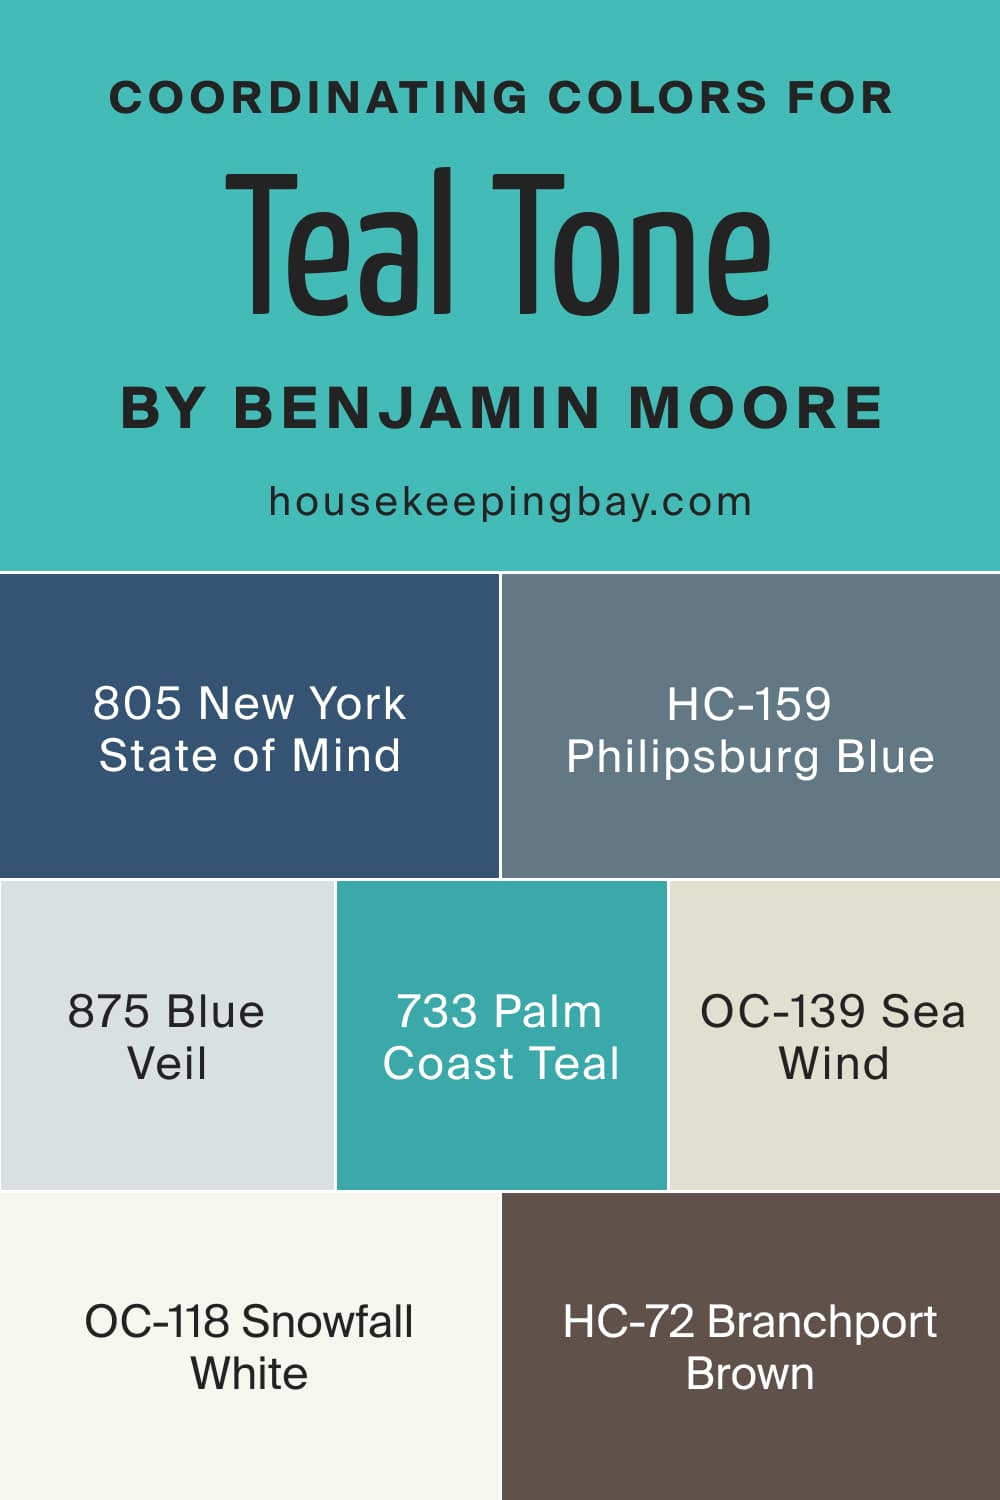 Coordinating Colors for BM Teal Tone 663 by Benjamin Moore